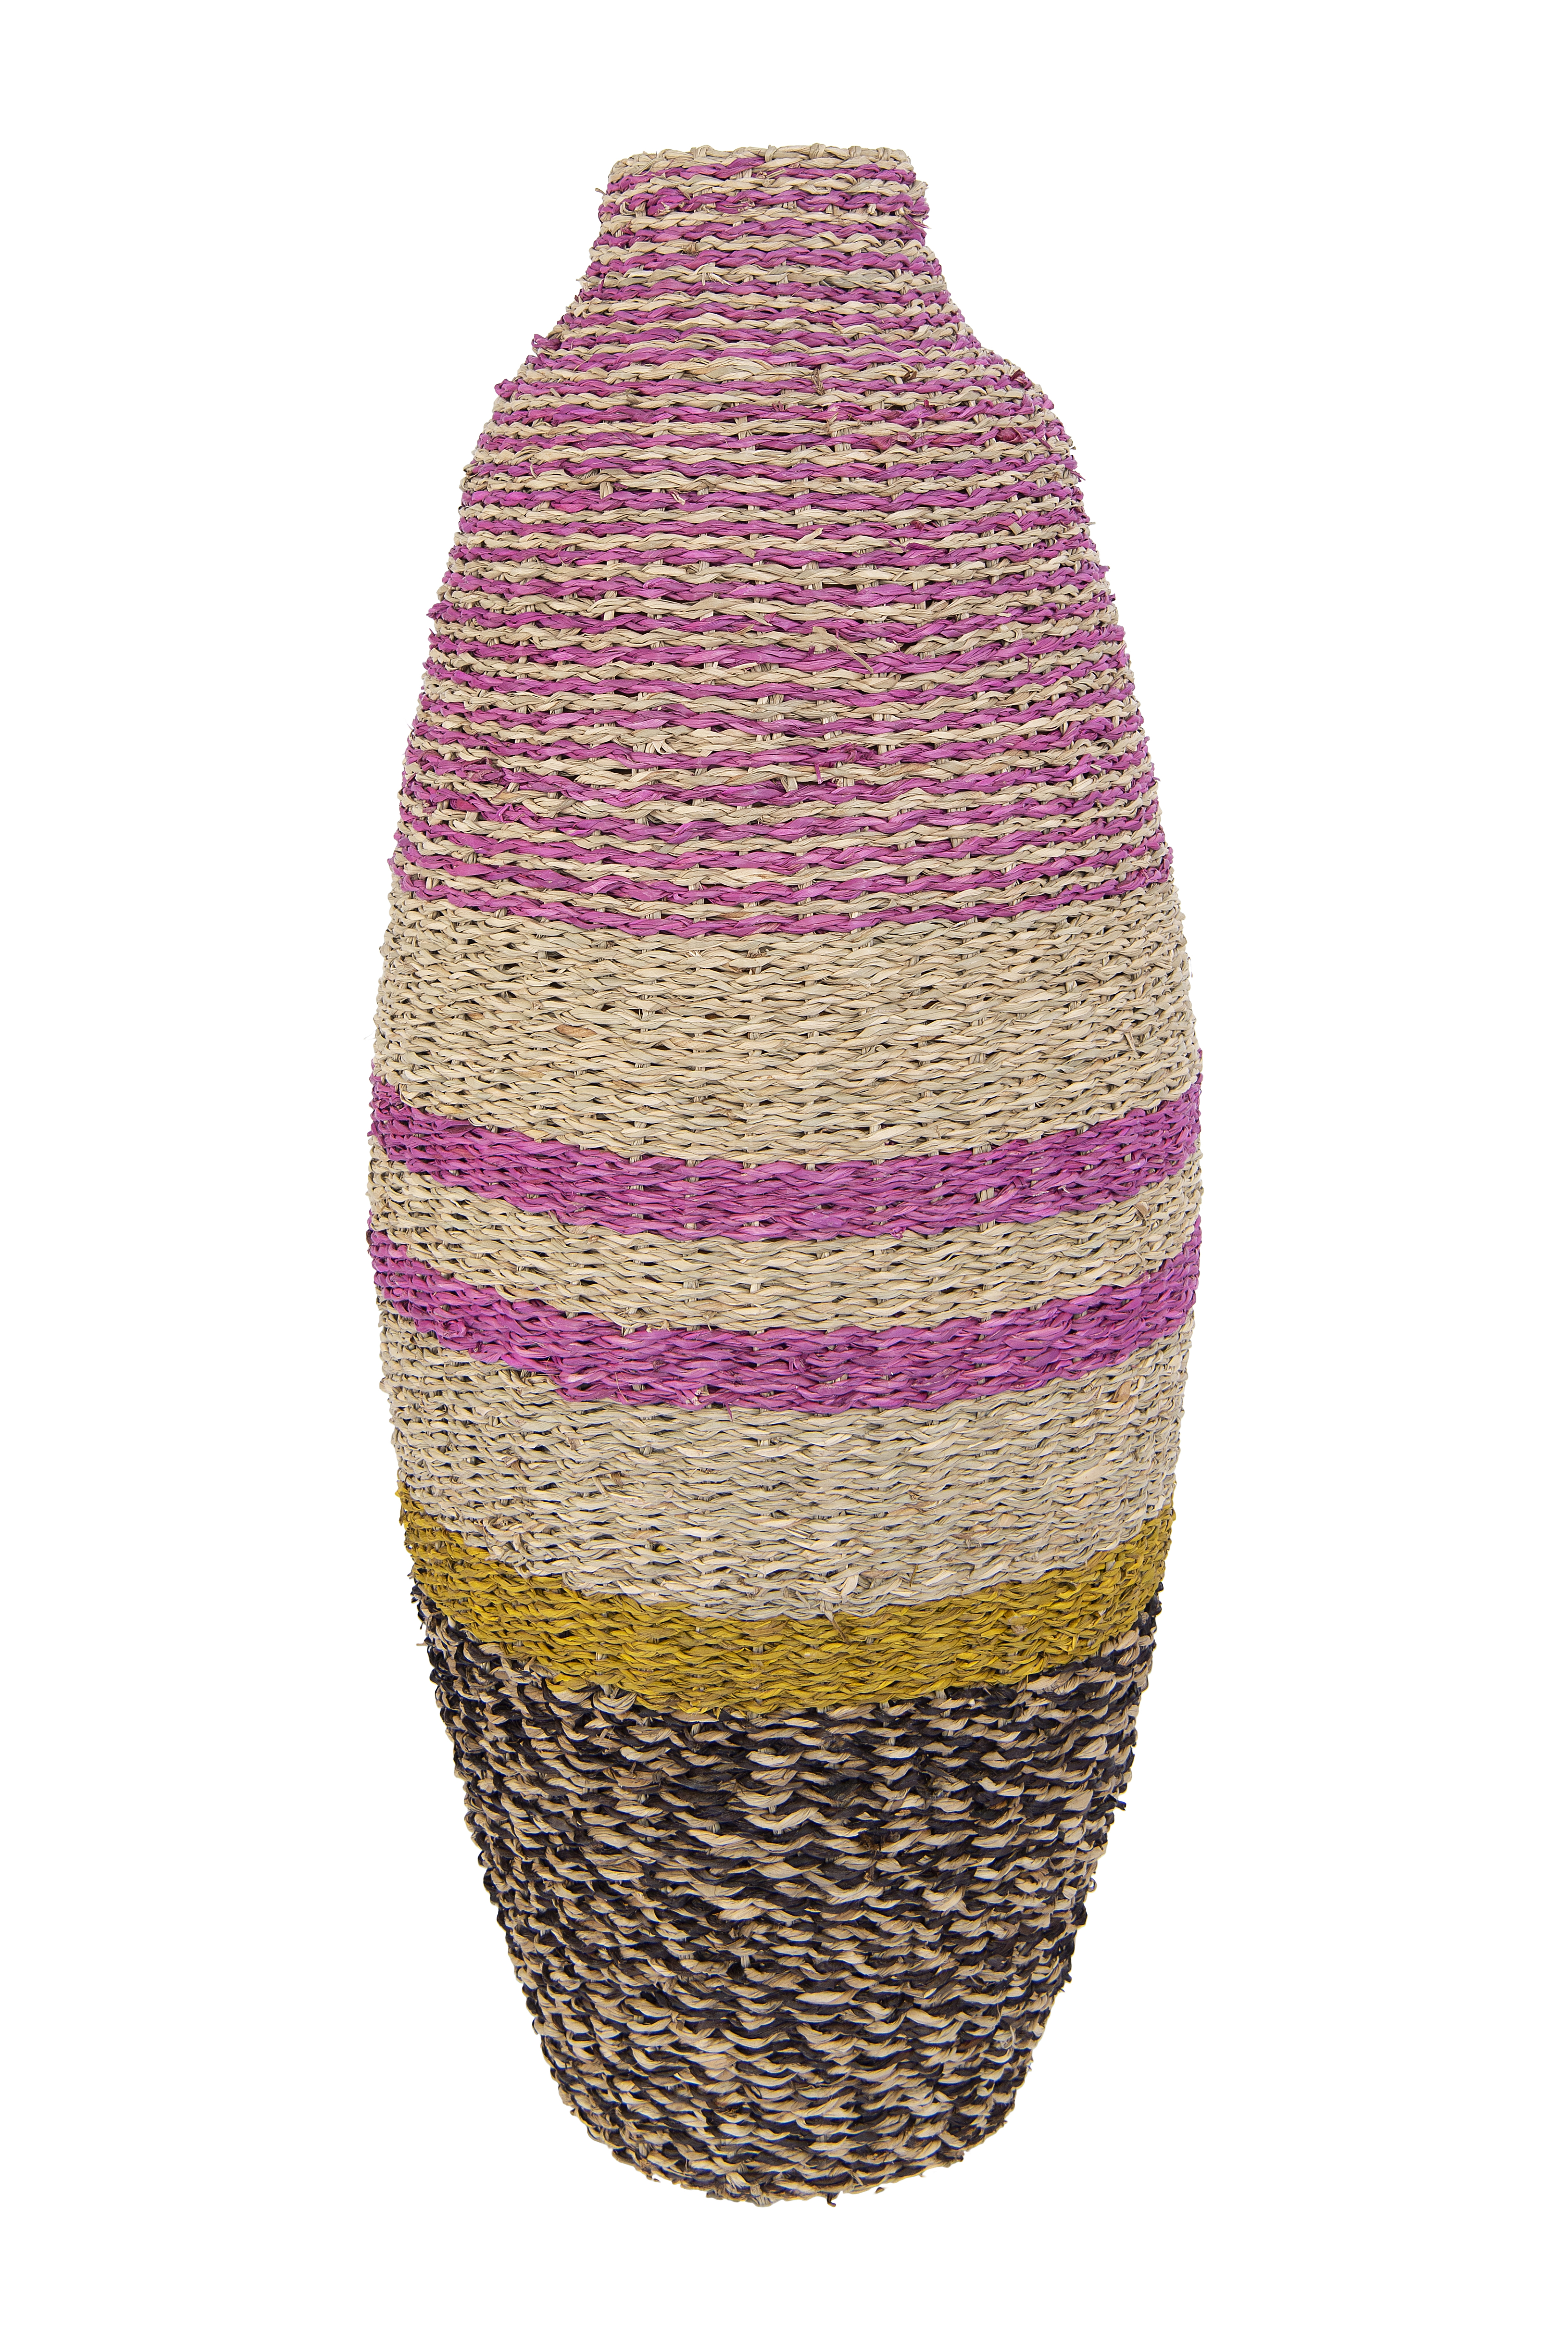 25"H Handwoven Bamboo & Seagrass Vase - Image 0